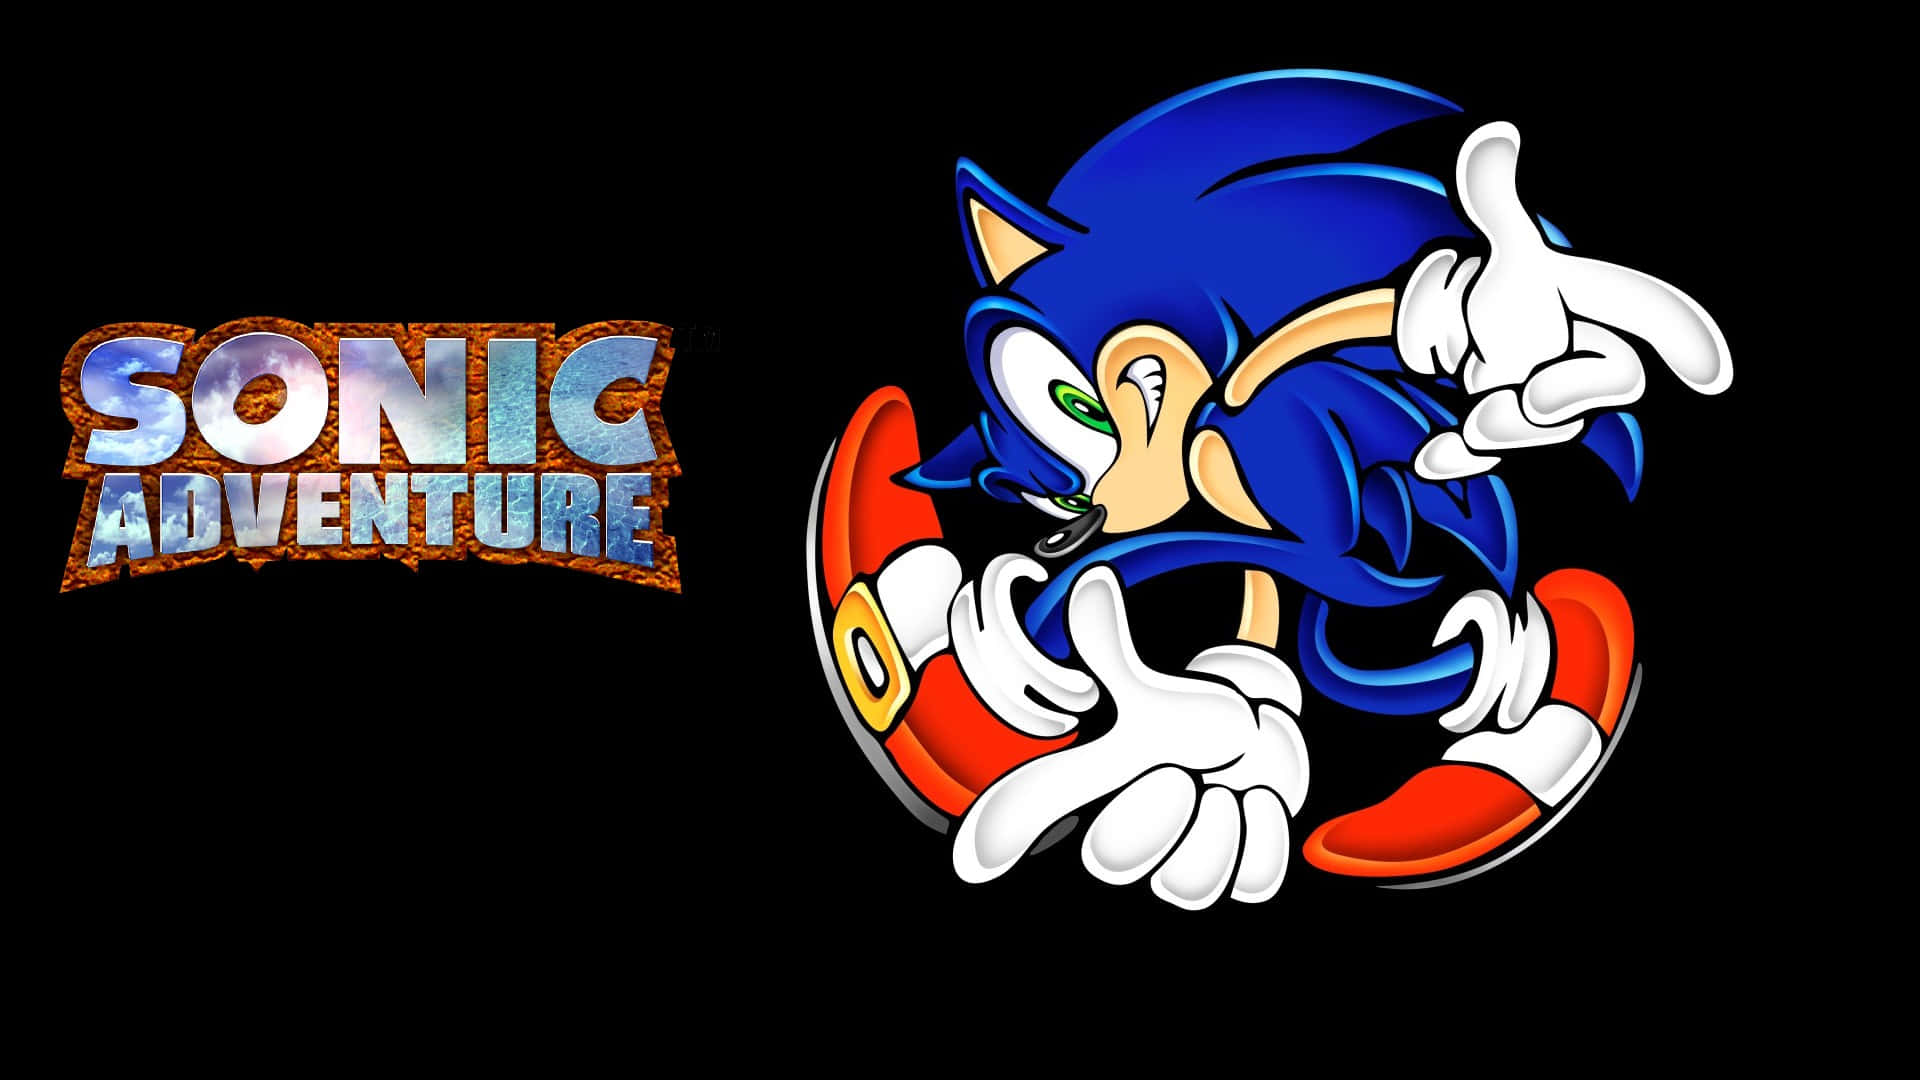 Sonic the Hedgehog logo on a vibrant background Wallpaper